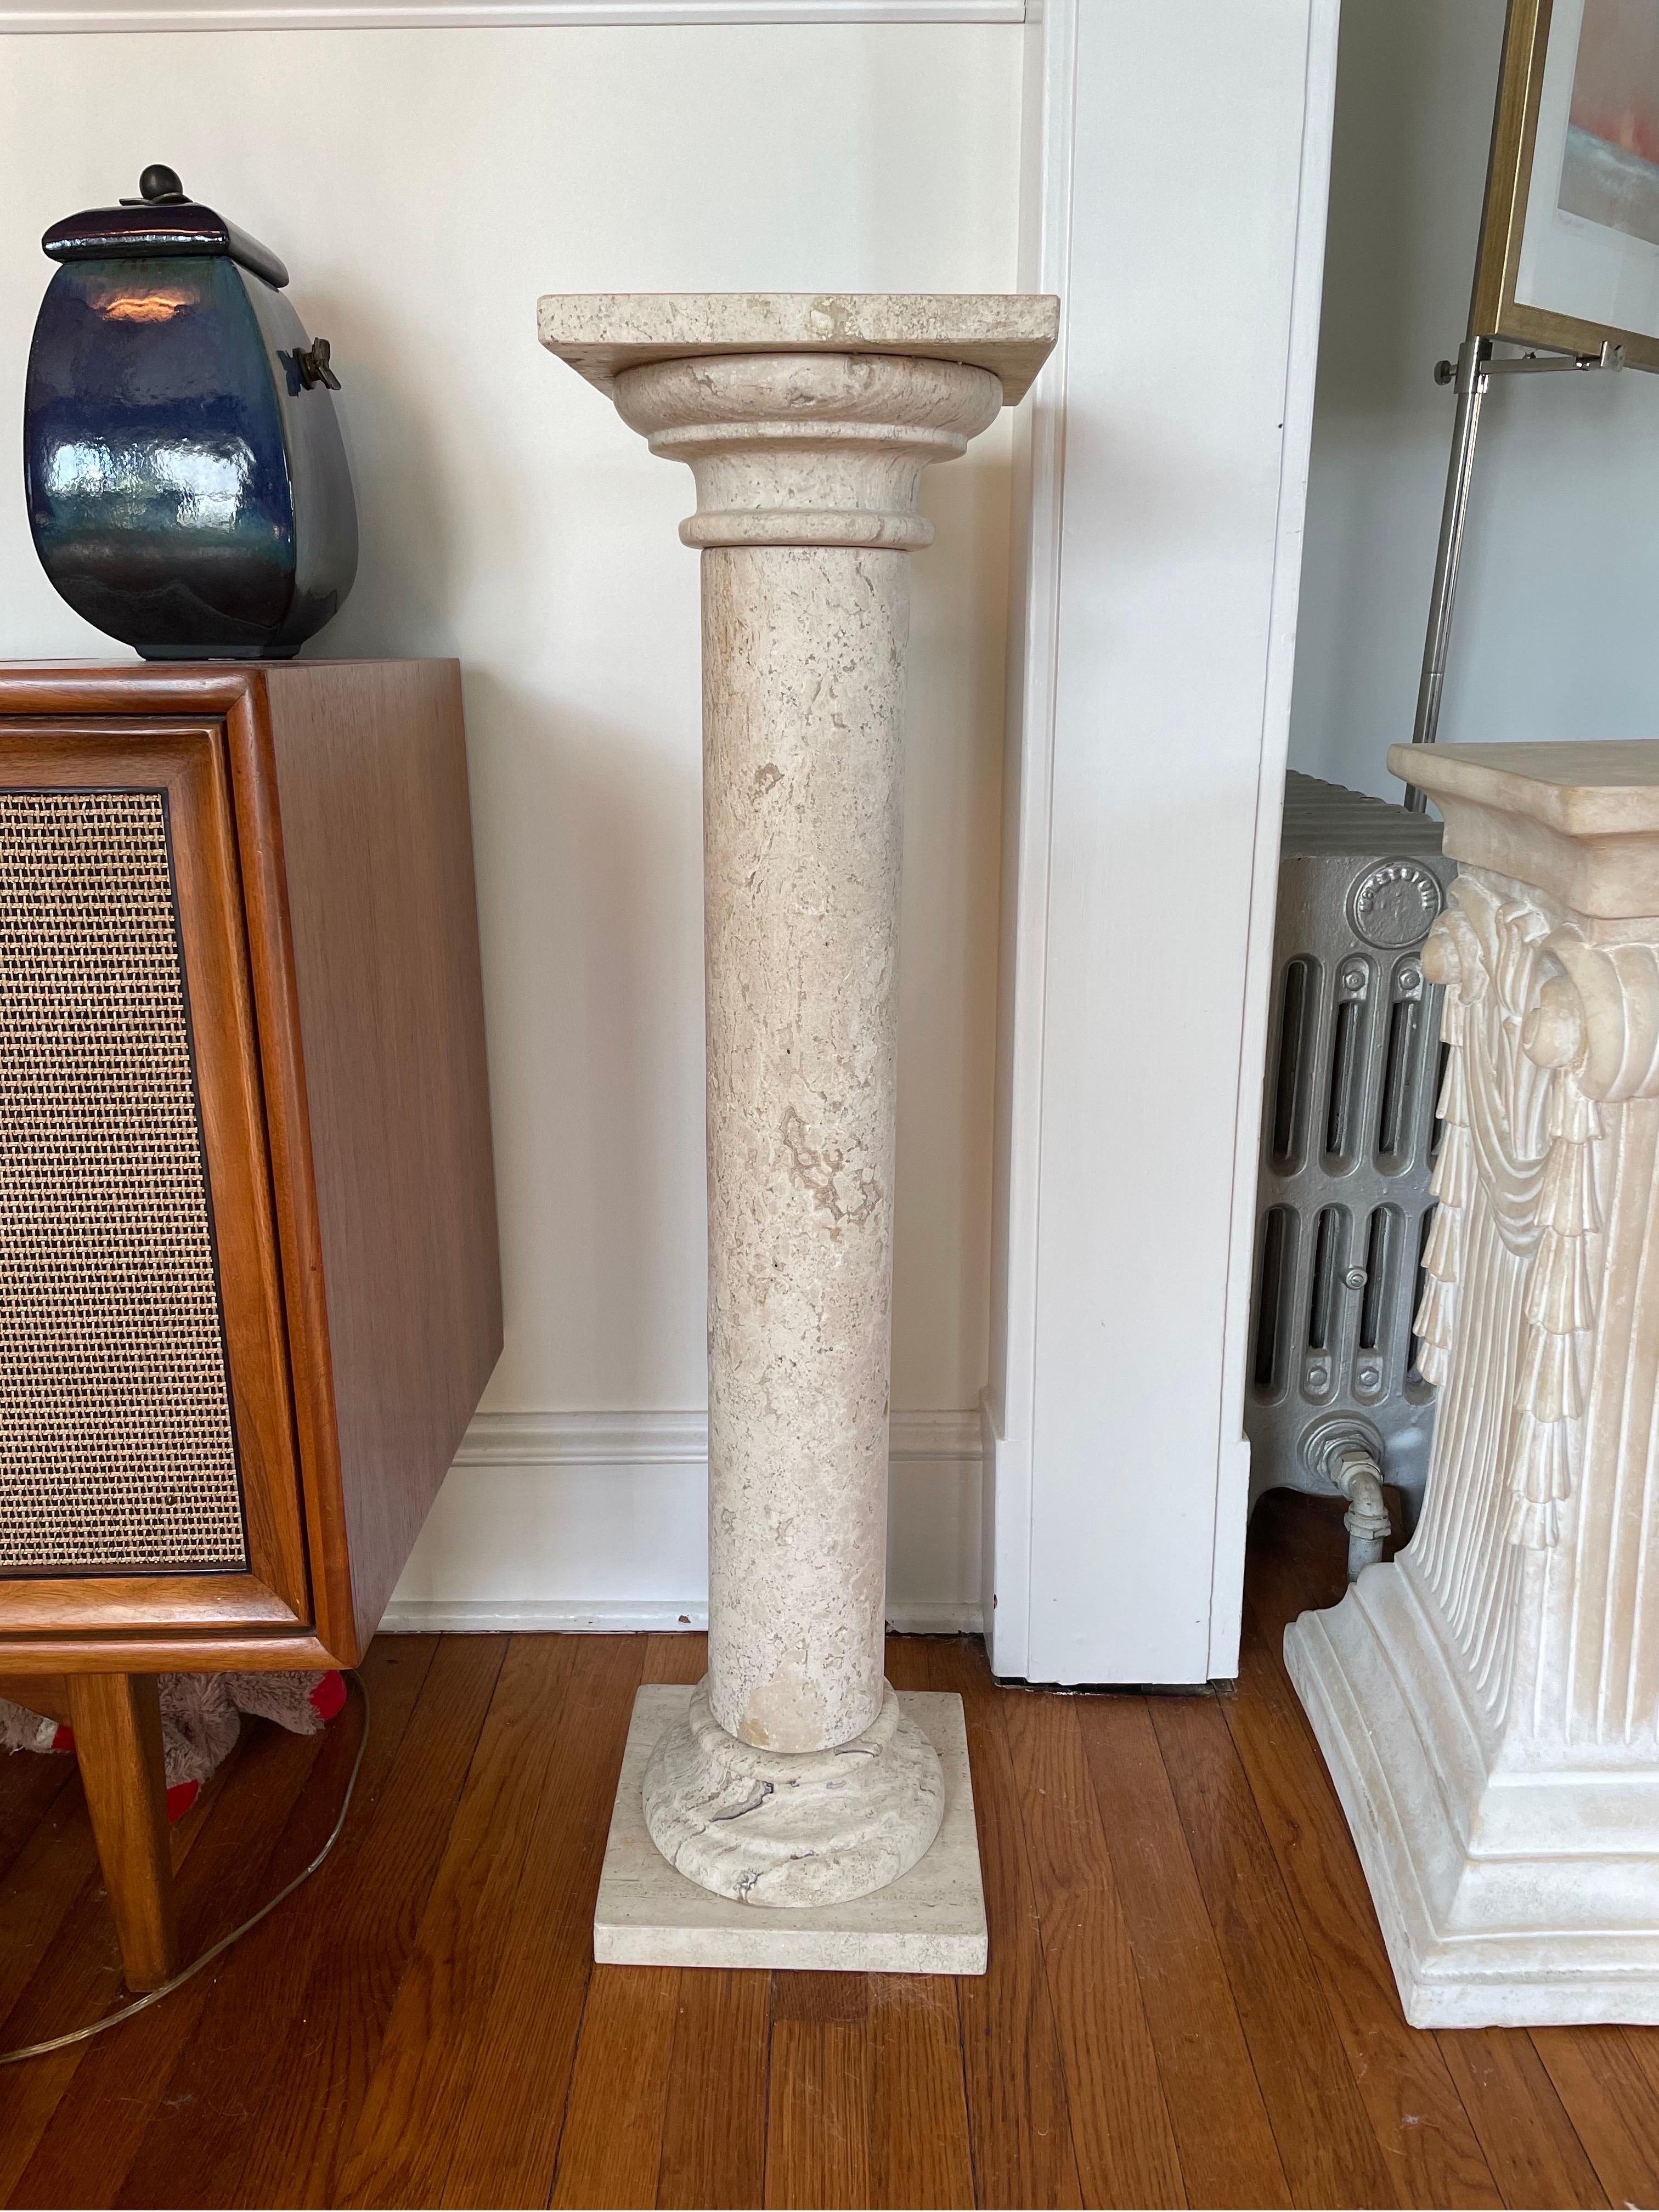 Classic Roman or Neoclassical Travertine Column Pedestal. Beautiful markings in the travertine. Rolling pin column sits into base as well as top to allow for easy transport or repositioning. Great to showcase art, or simply leave by itself.